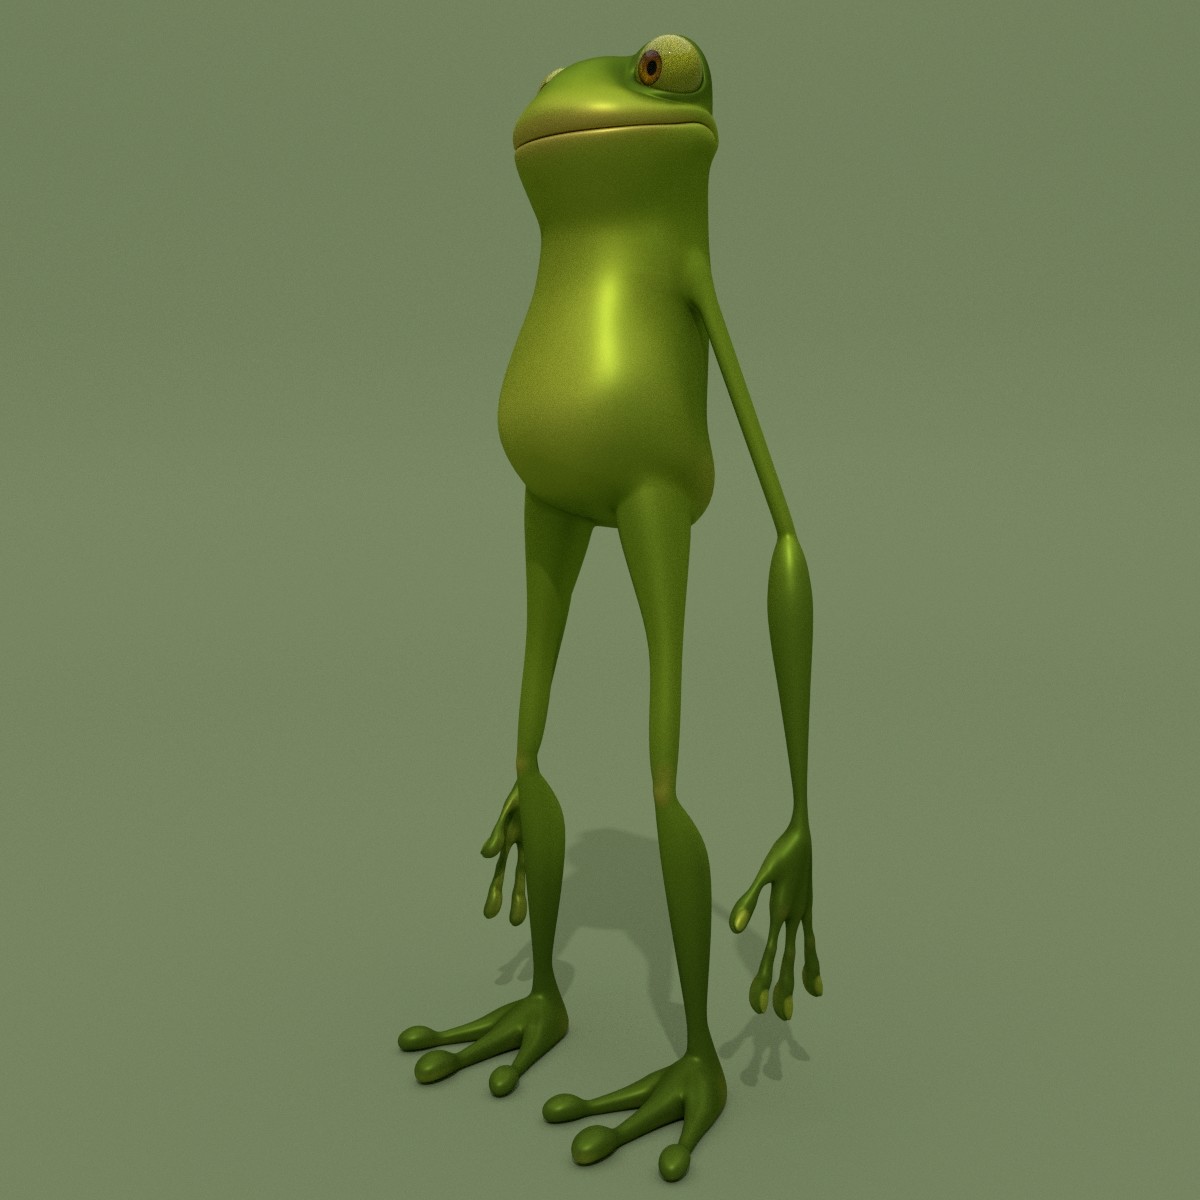 ArtStation - Cartoon Frog with Cool Buttocks | Resources